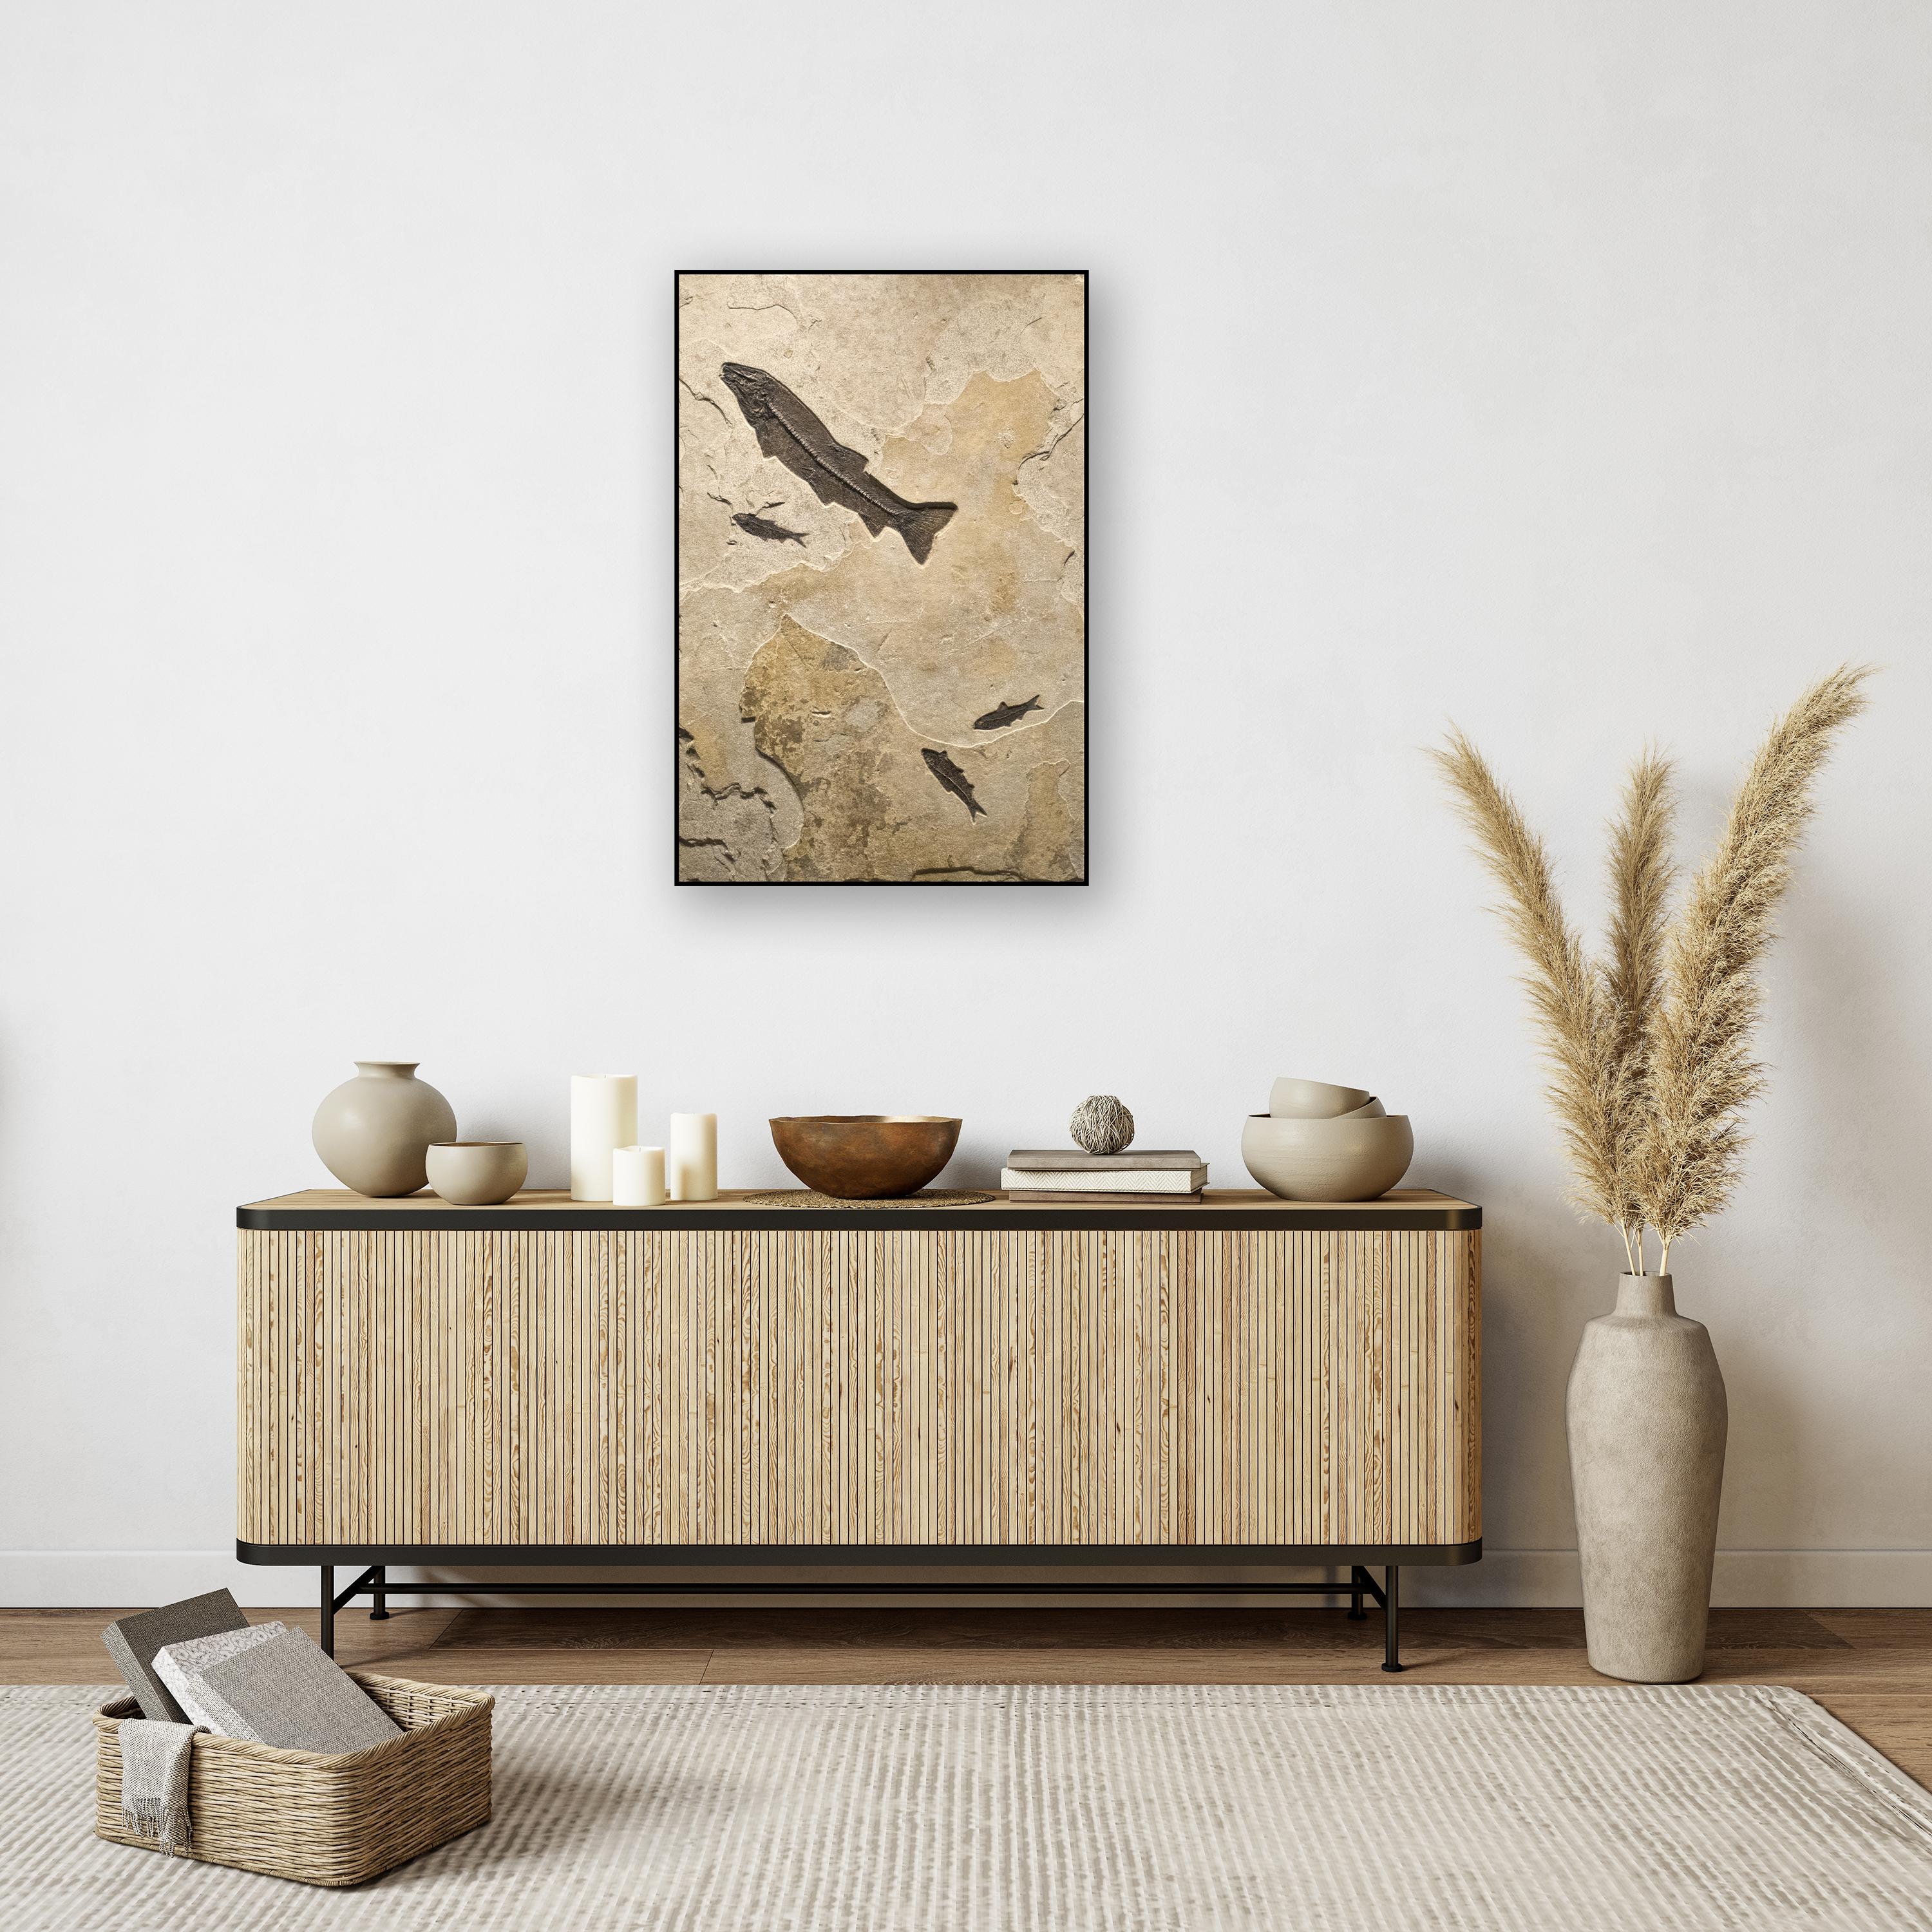 This unique fossil mural features one Notogoneus osculus and three Knightia eocaena, all of which are Eocene era fossils dating back about 50 million years. This grouping of ancient fish is forever preserved in a beautifully textured matrix of